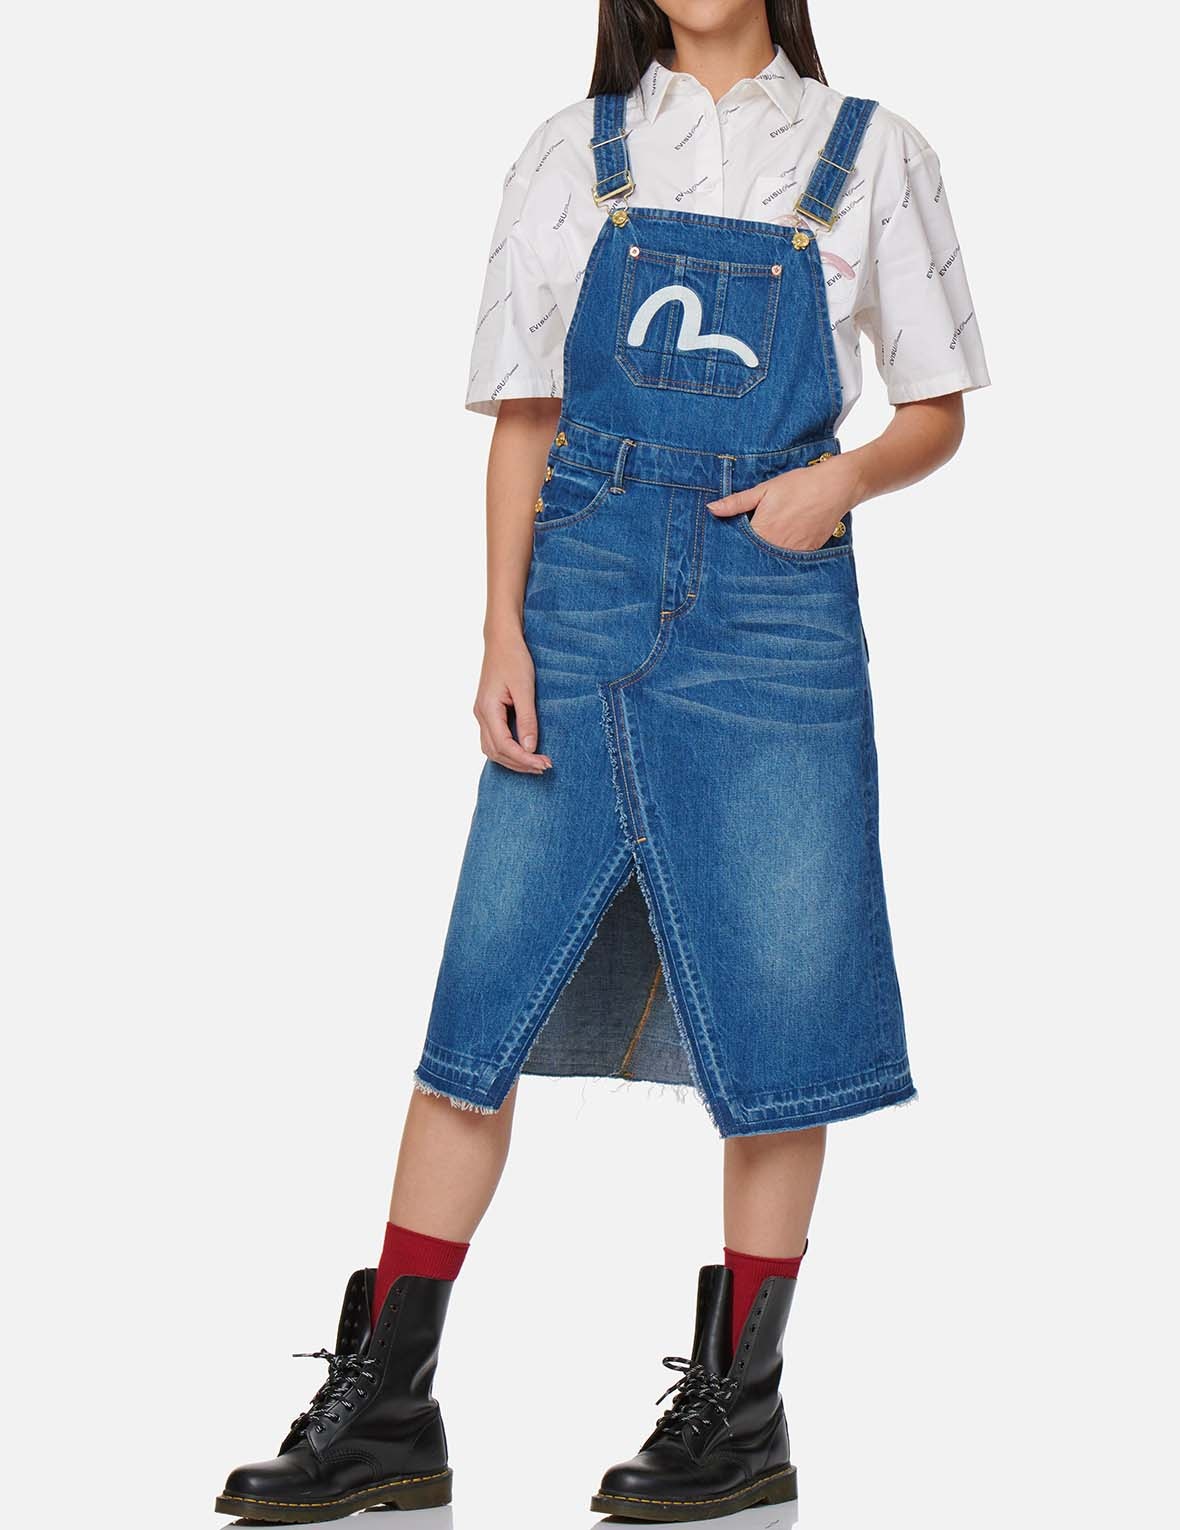 SEAGULL EMBROIDERED DENIM DUNGAREE DRESS - 5